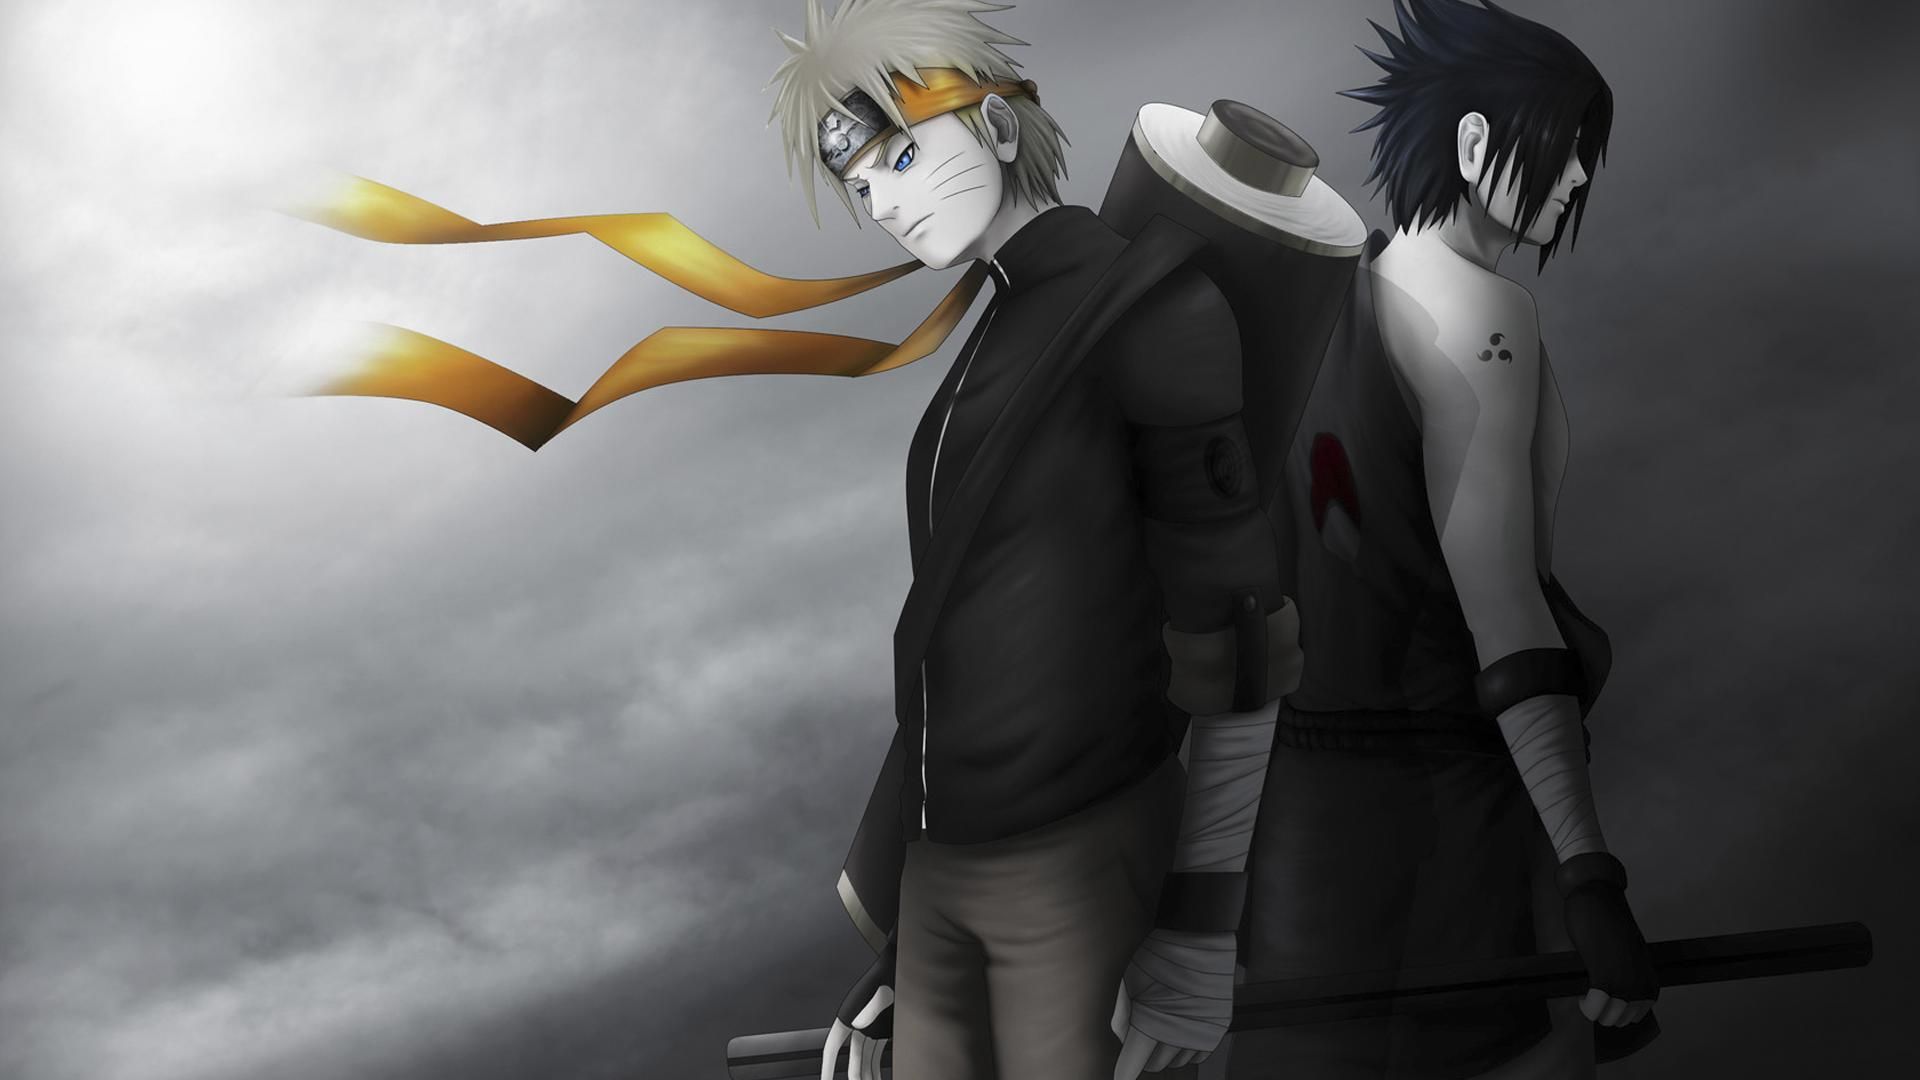 Wallpapers Of Naruto Shippuden | One Piece HD Wallpapers